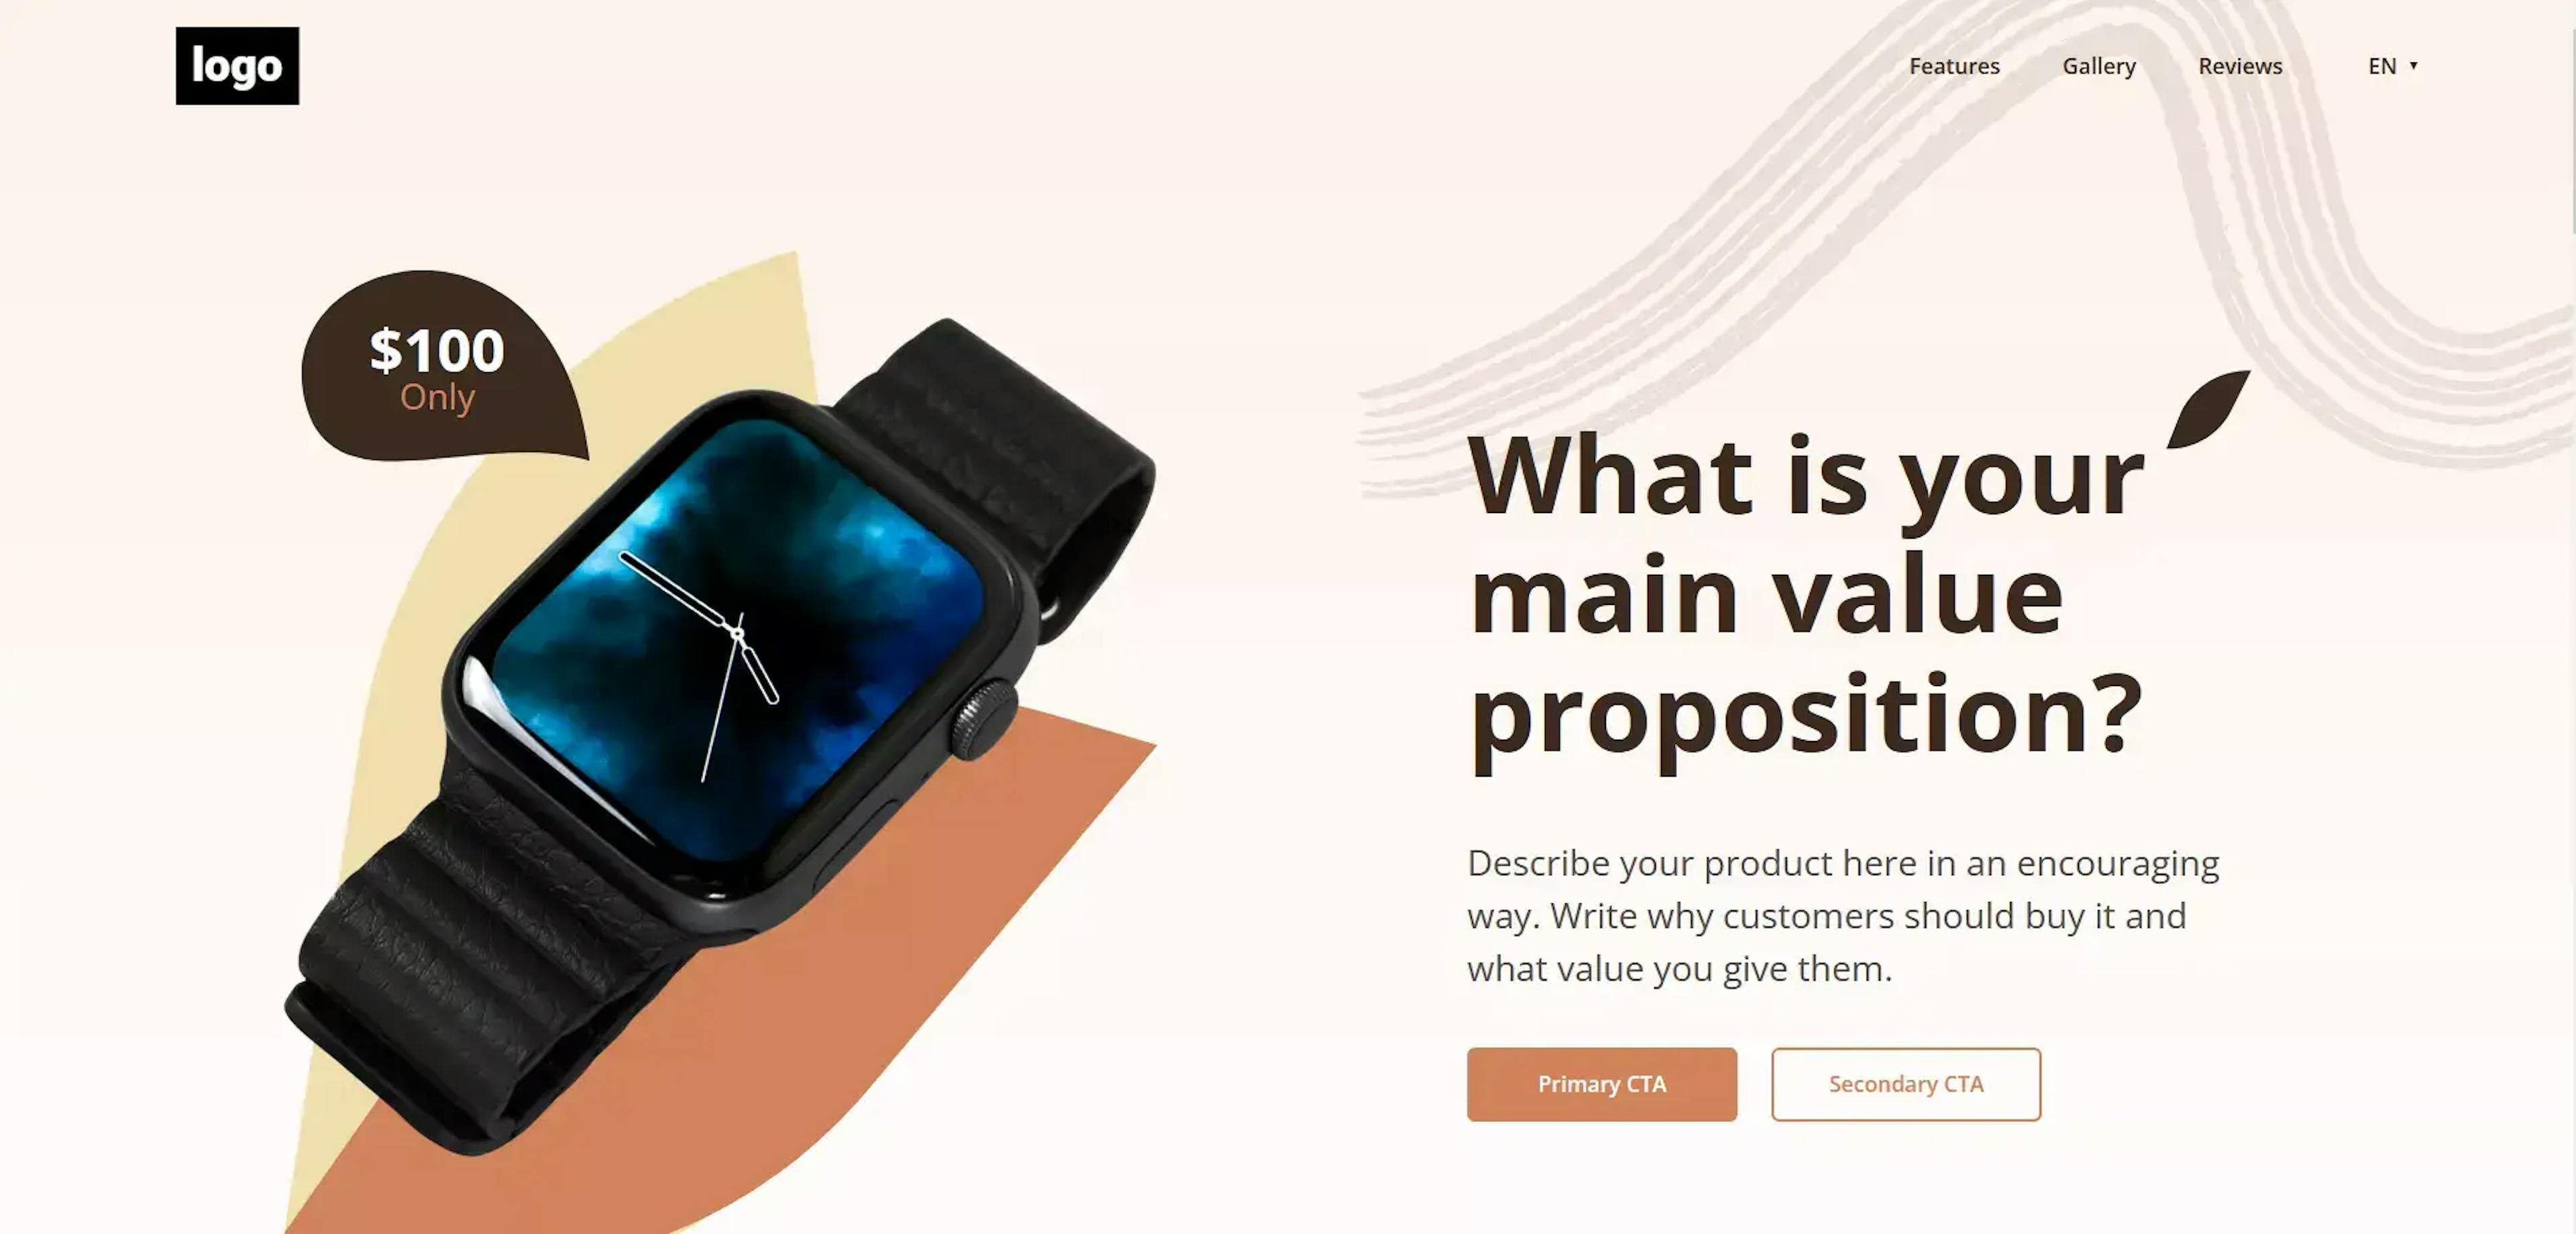 Landing Page of the product by BOWWE